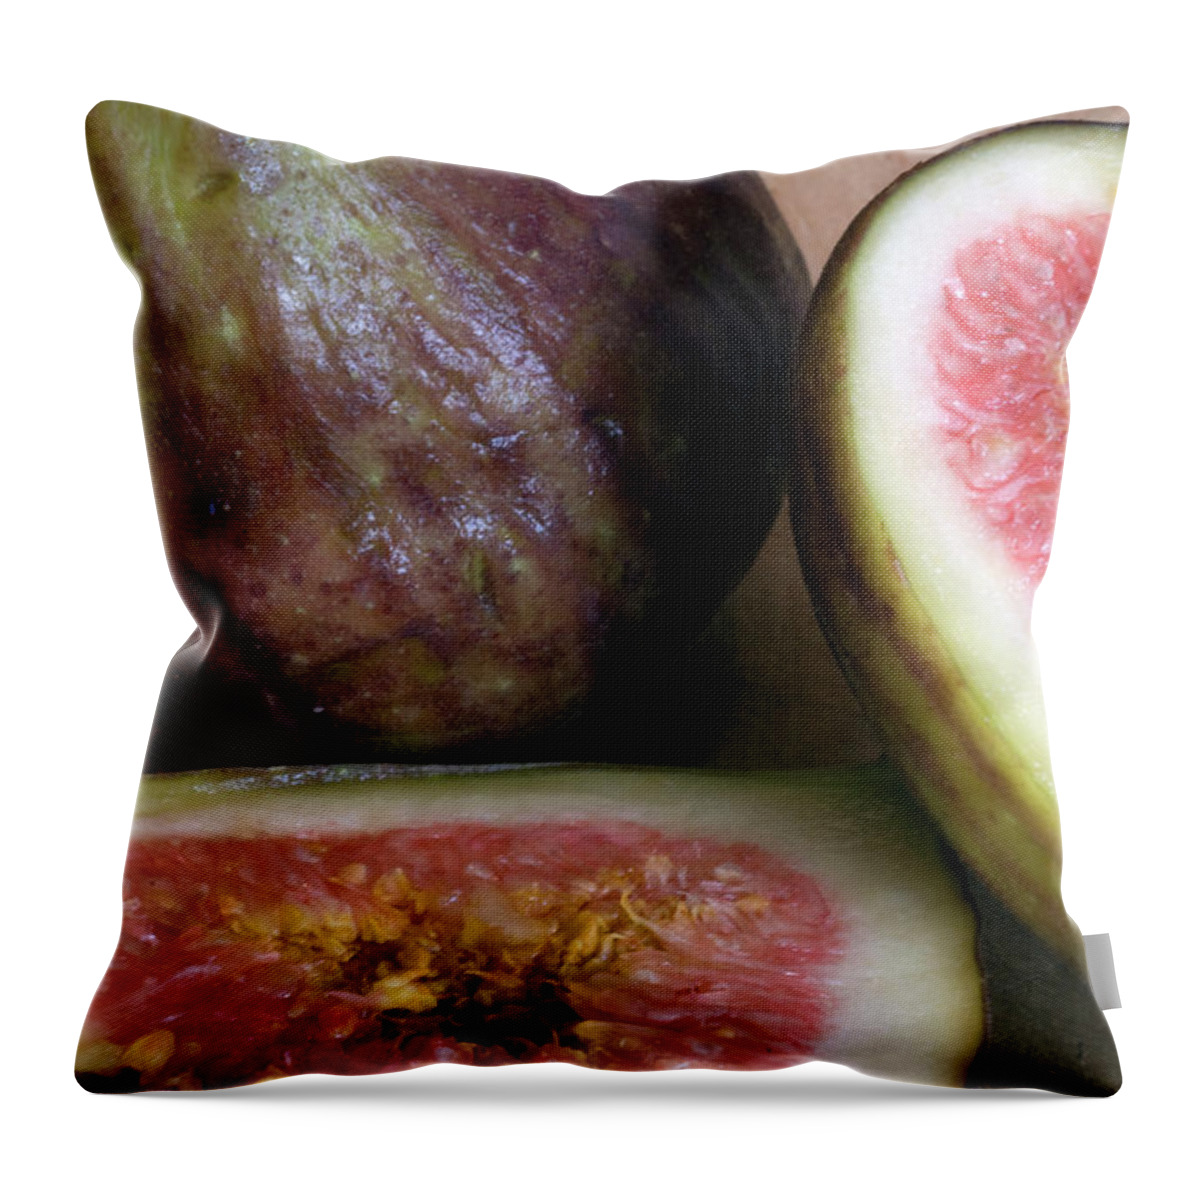 Close-up Throw Pillow featuring the photograph Close-up Of A Whole And A Cut Fig by Rebecca E Marvil